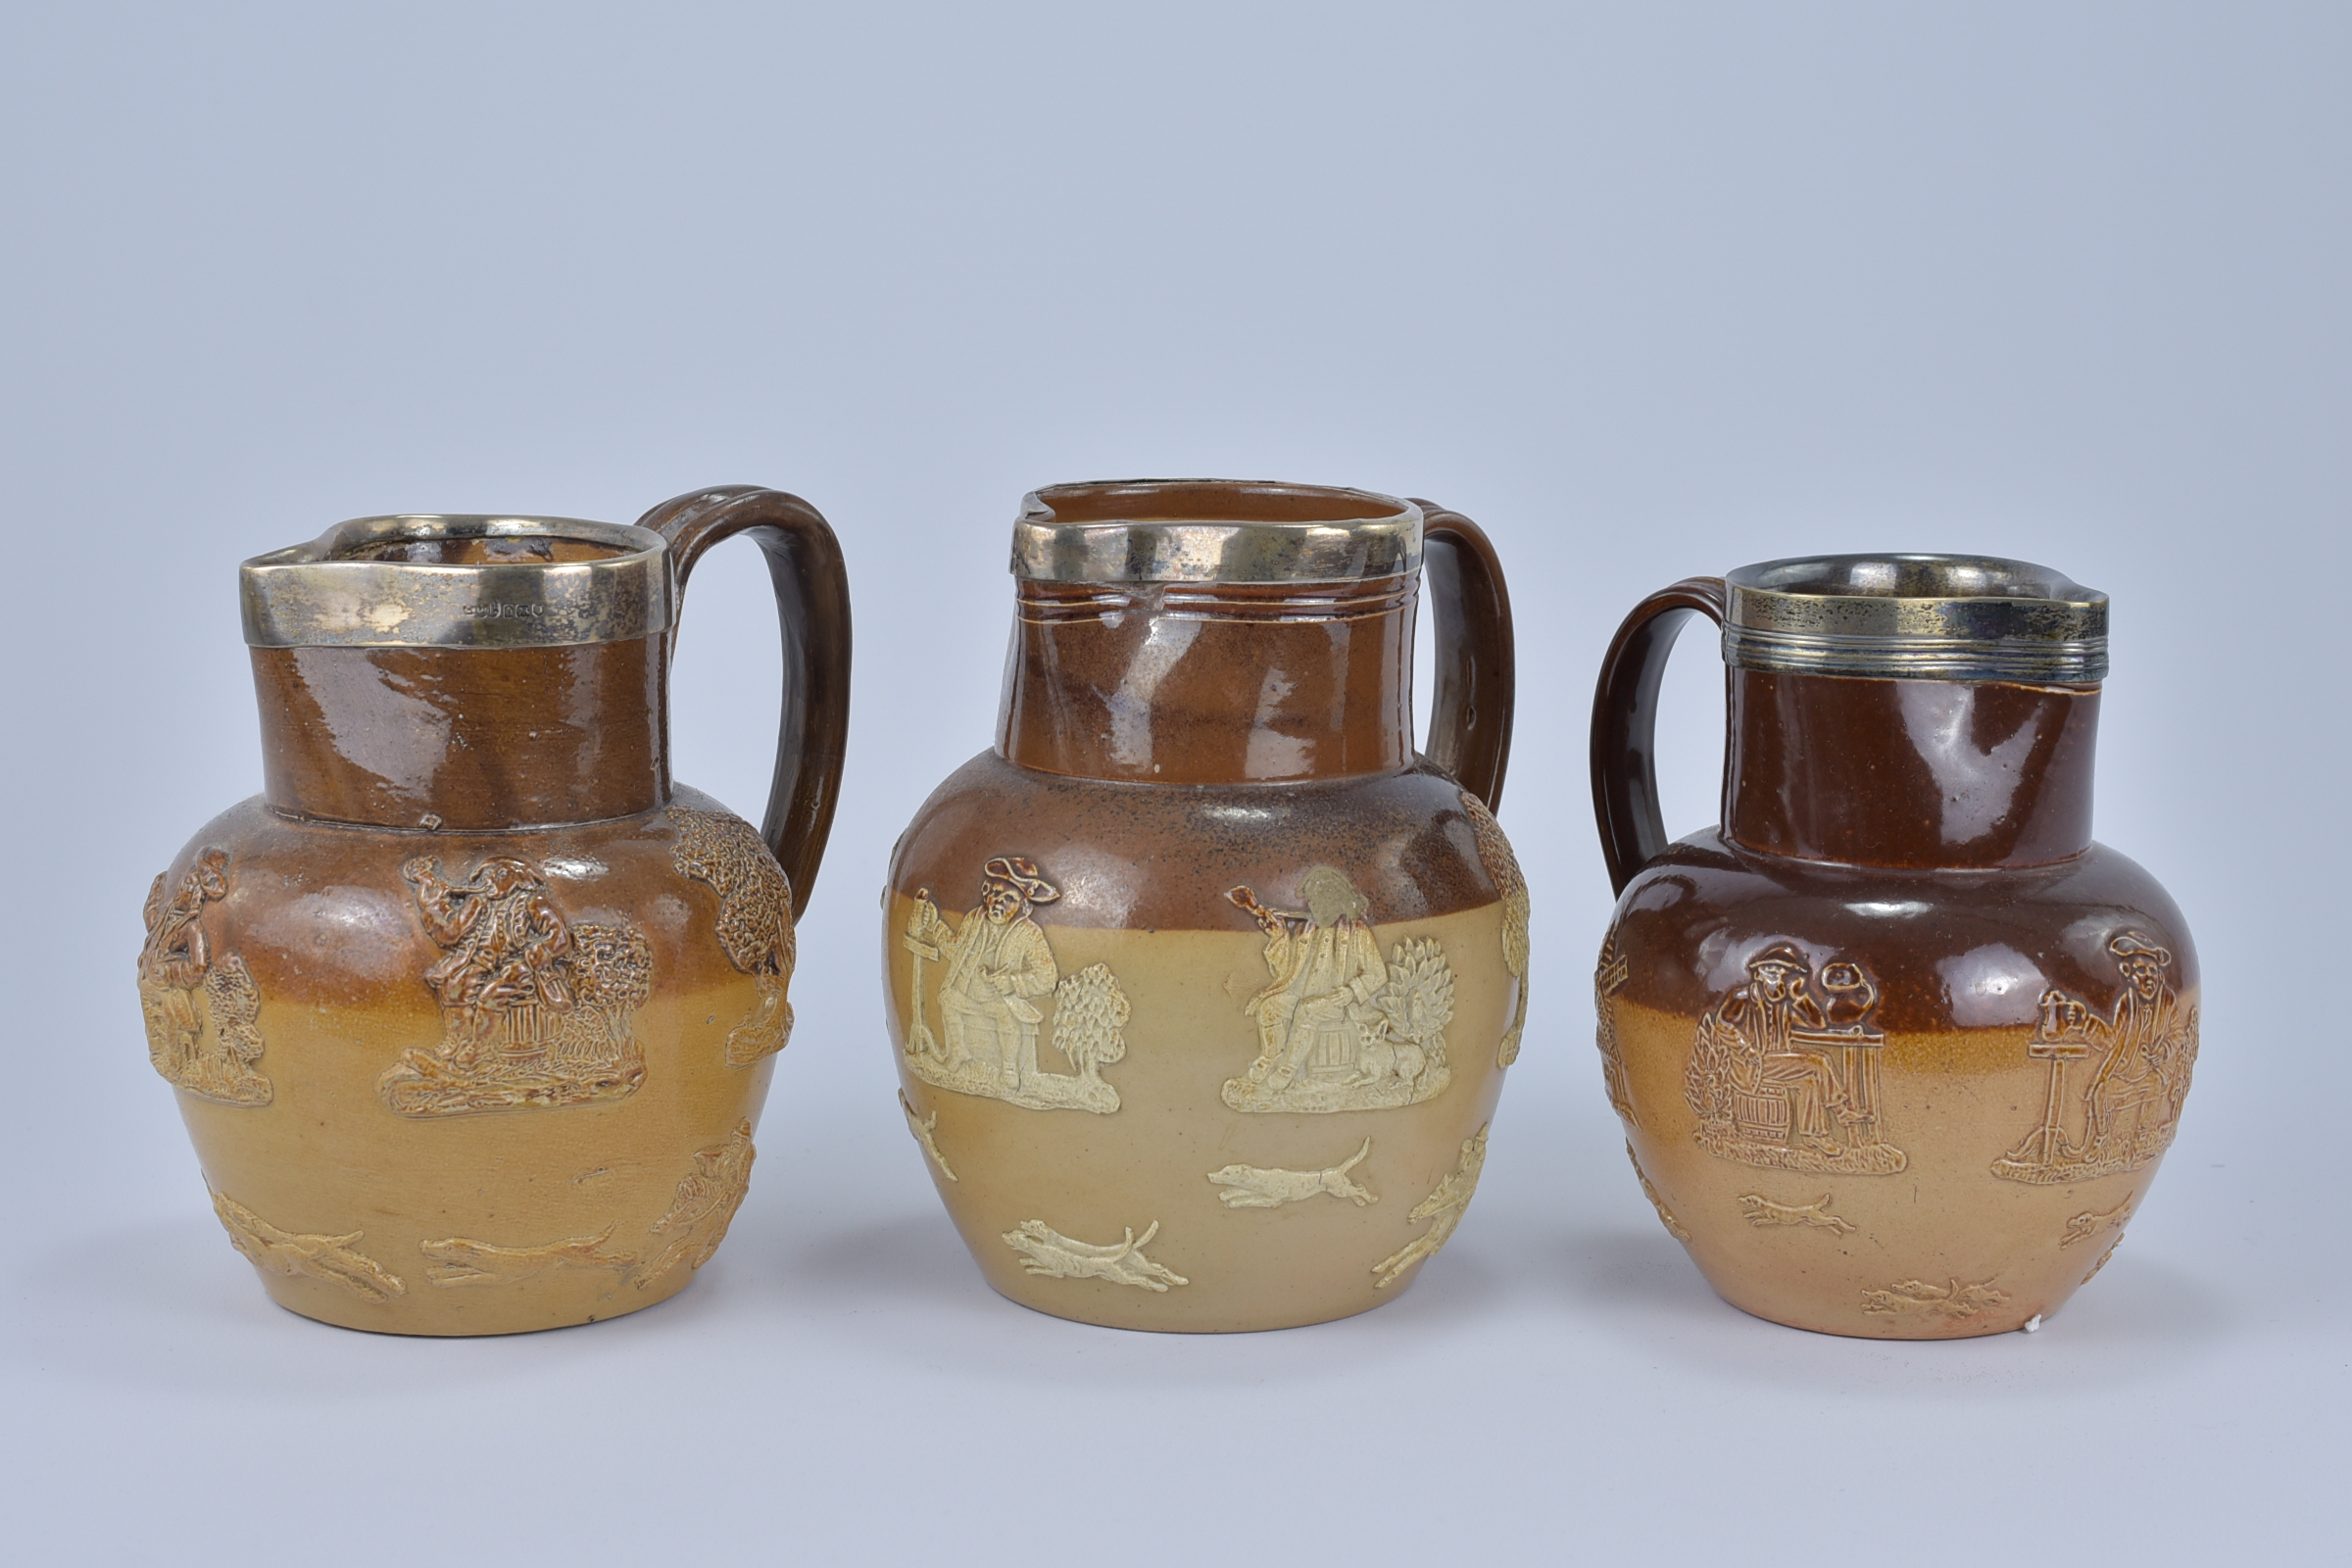 Two Royal Doulton Lamberth stoneware Jugs with stamped silver rims. 16cm tall, 16.4cm tall, 17cm tal - Image 2 of 5